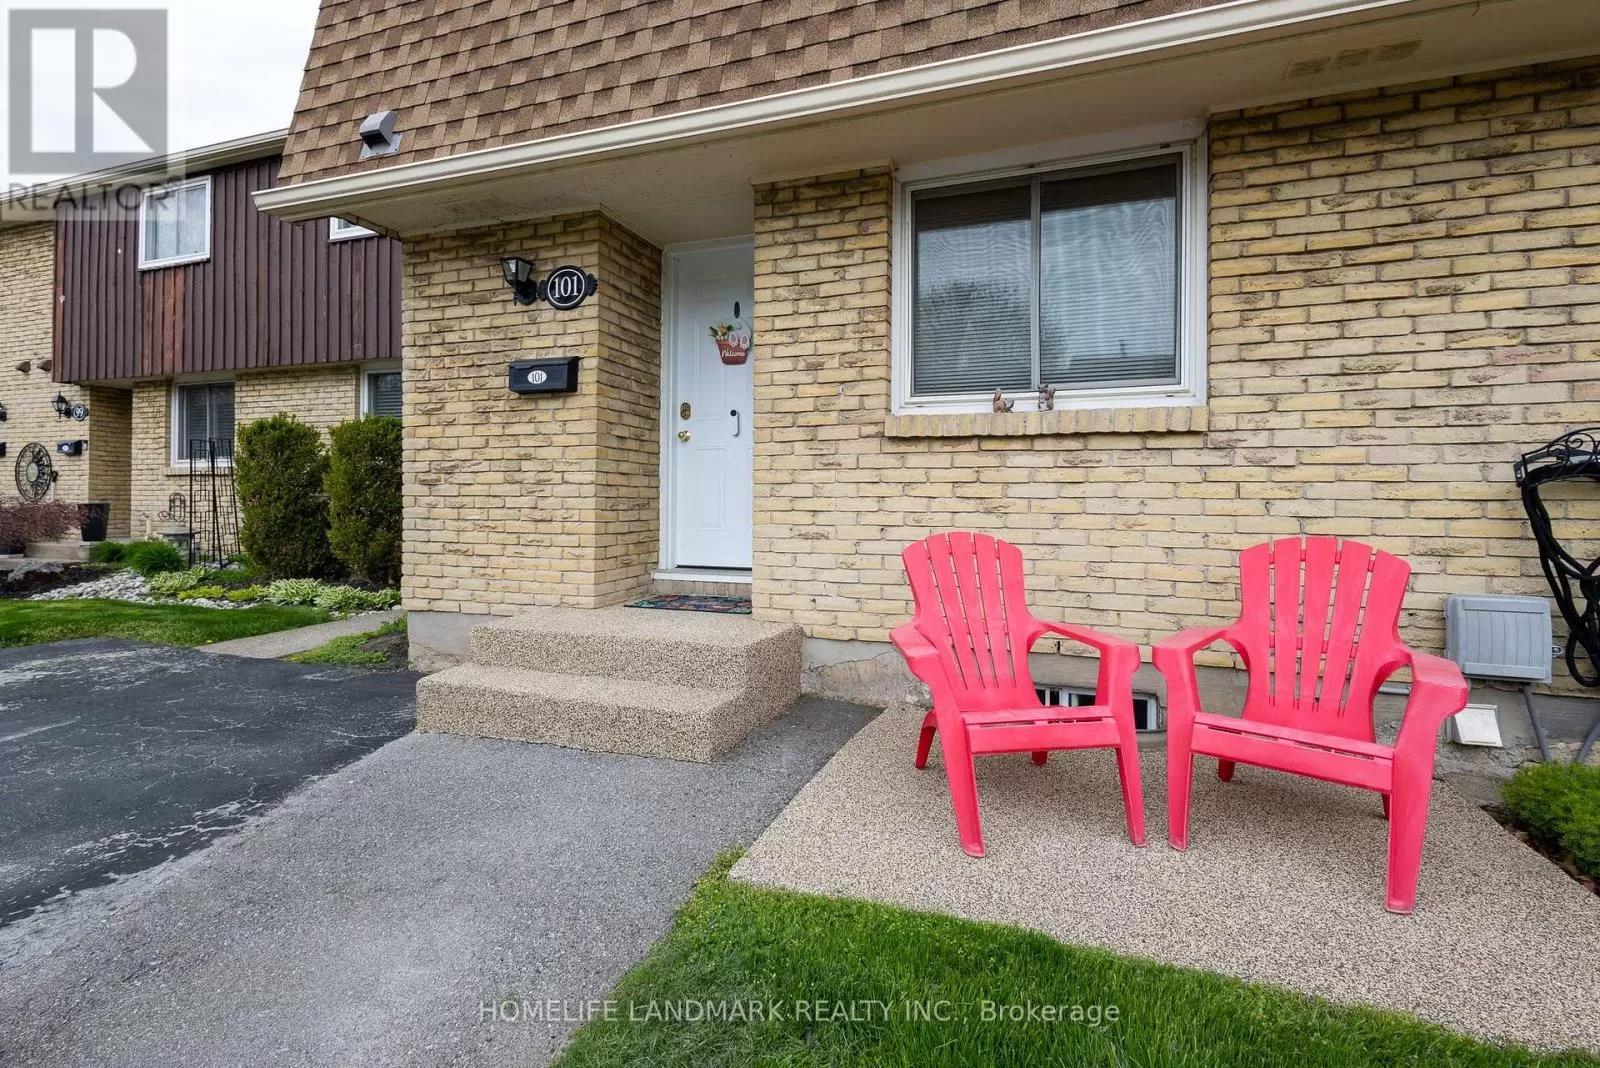 Row / Townhouse for rent: #101 -50 Lakeshore Rd S, St. Catharines, Ontario L2N 6P8